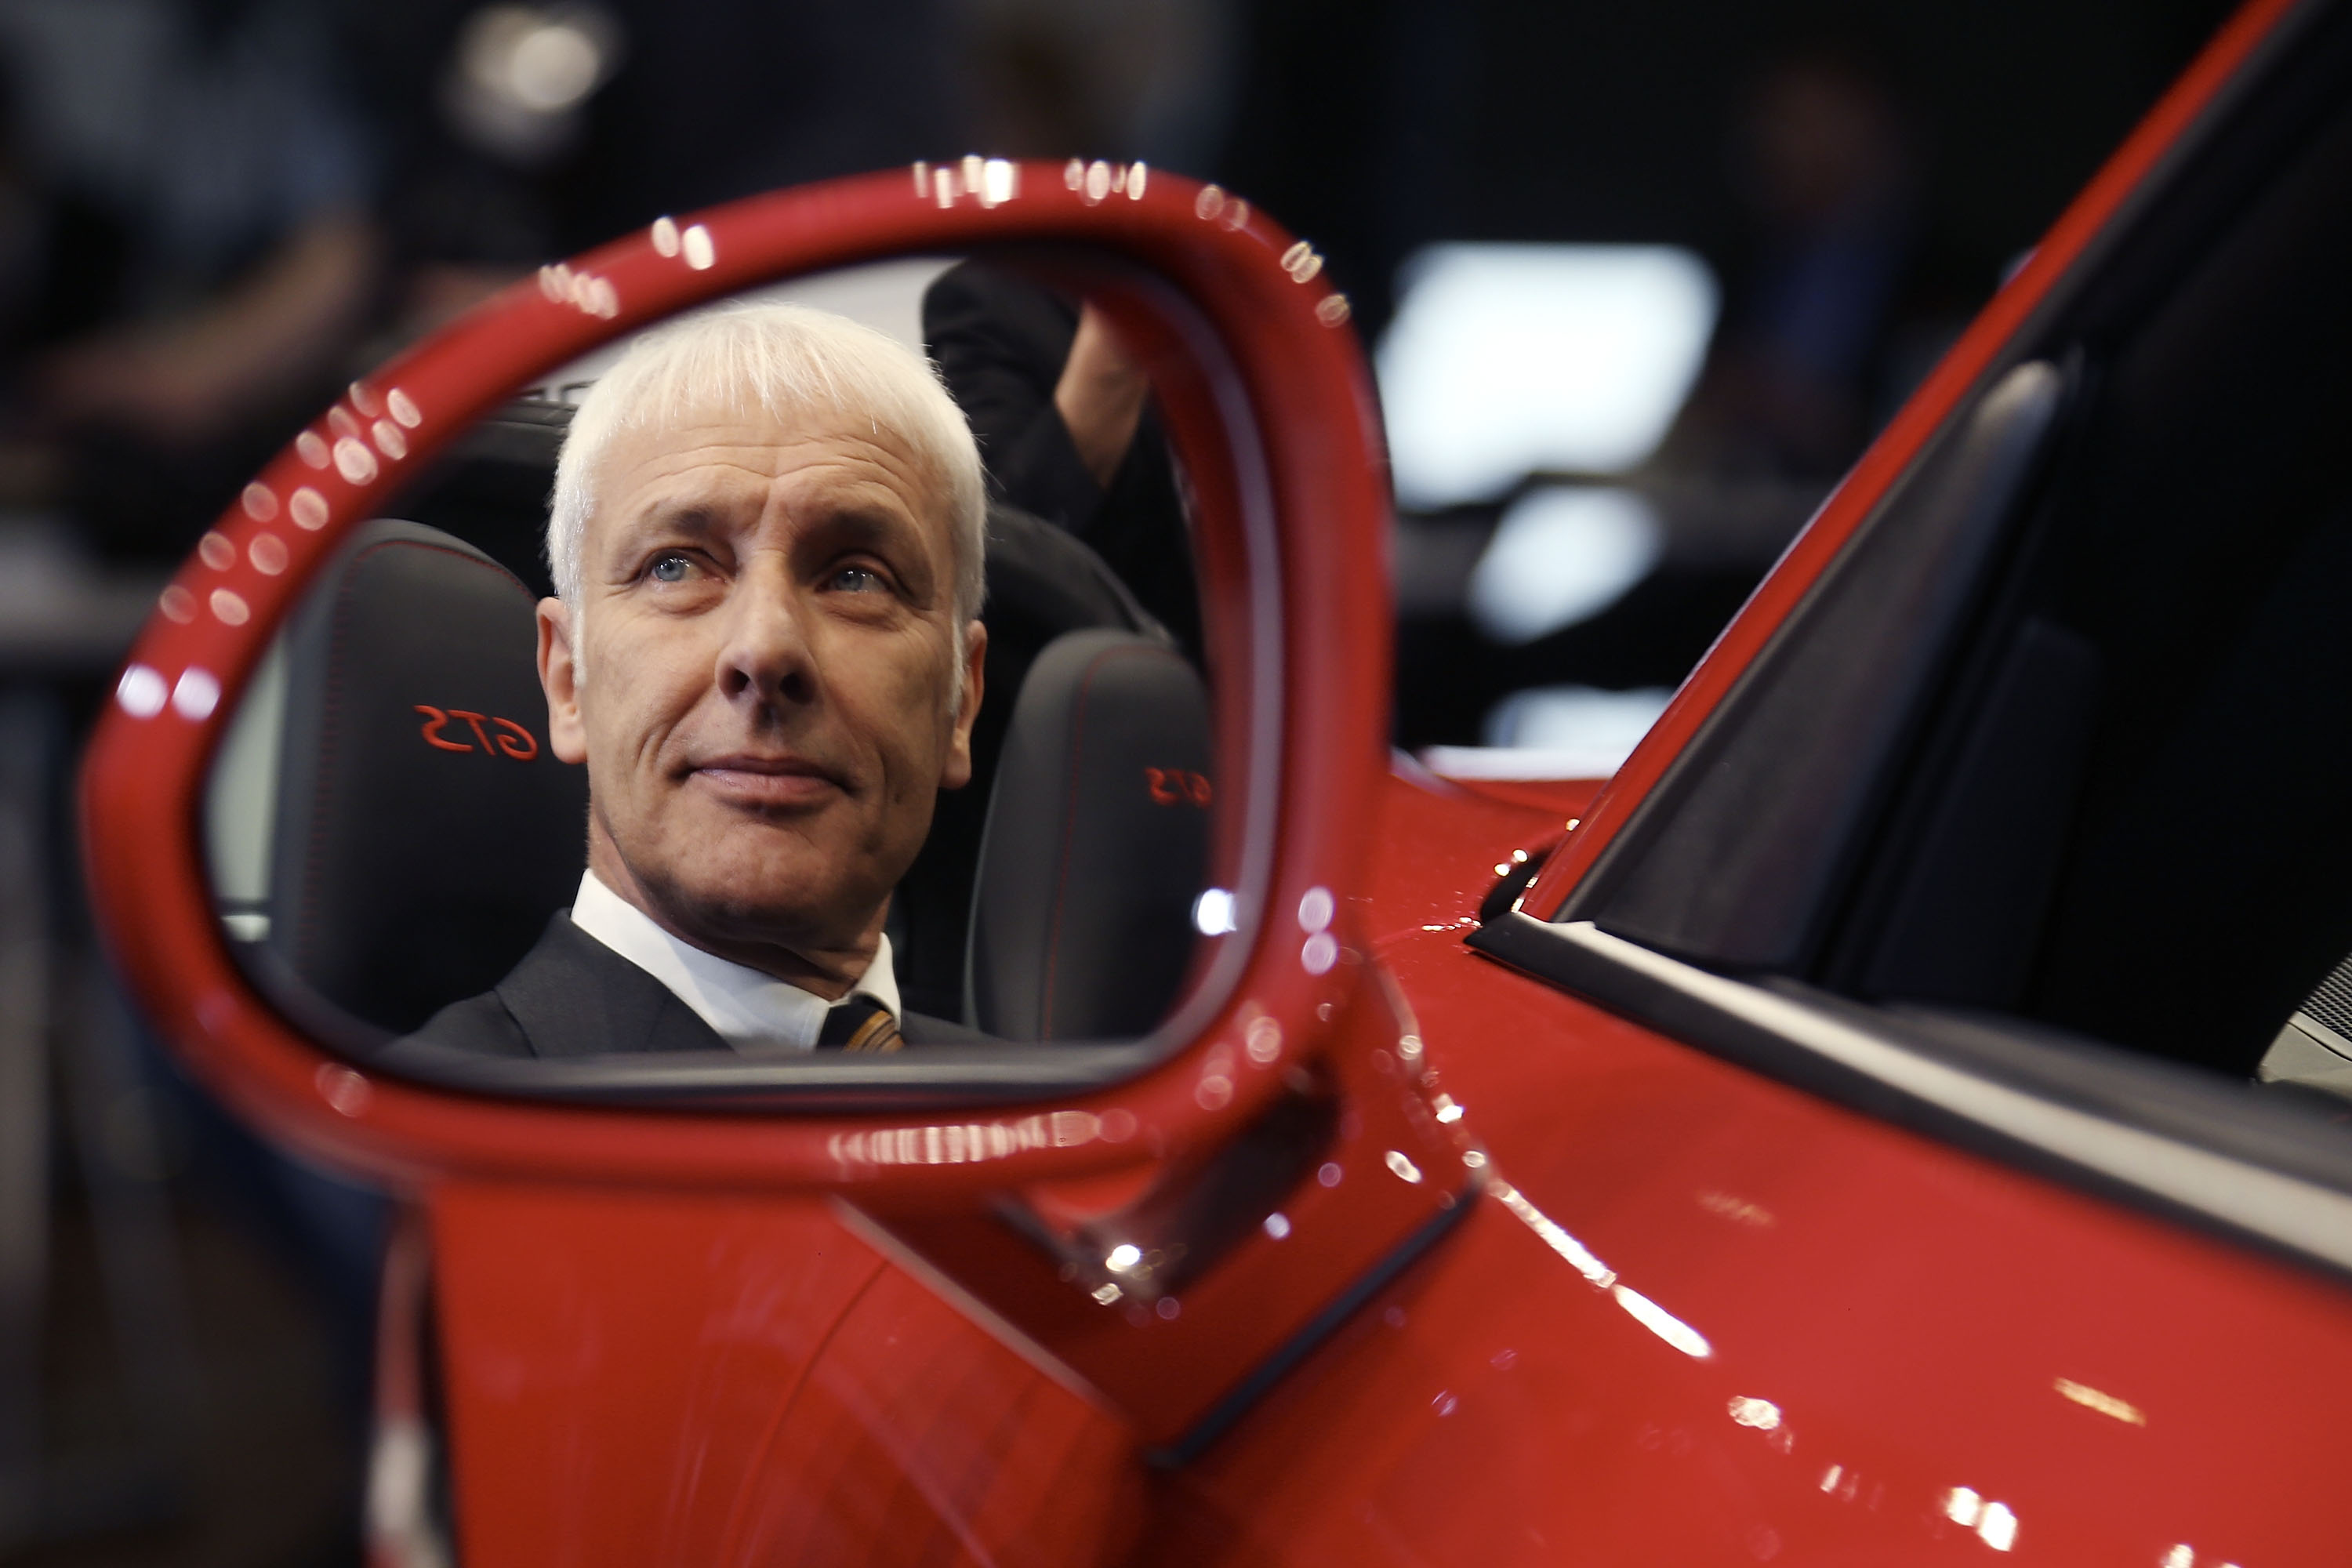 Matthias Mueller, CEO of Porsche AG poses in a Porsche Targa 4 GTS at the Porsche AG annual press conference in Stuttgart, Germany, on March 13, 2015. (Thomas Niedermueller—Getty Images)